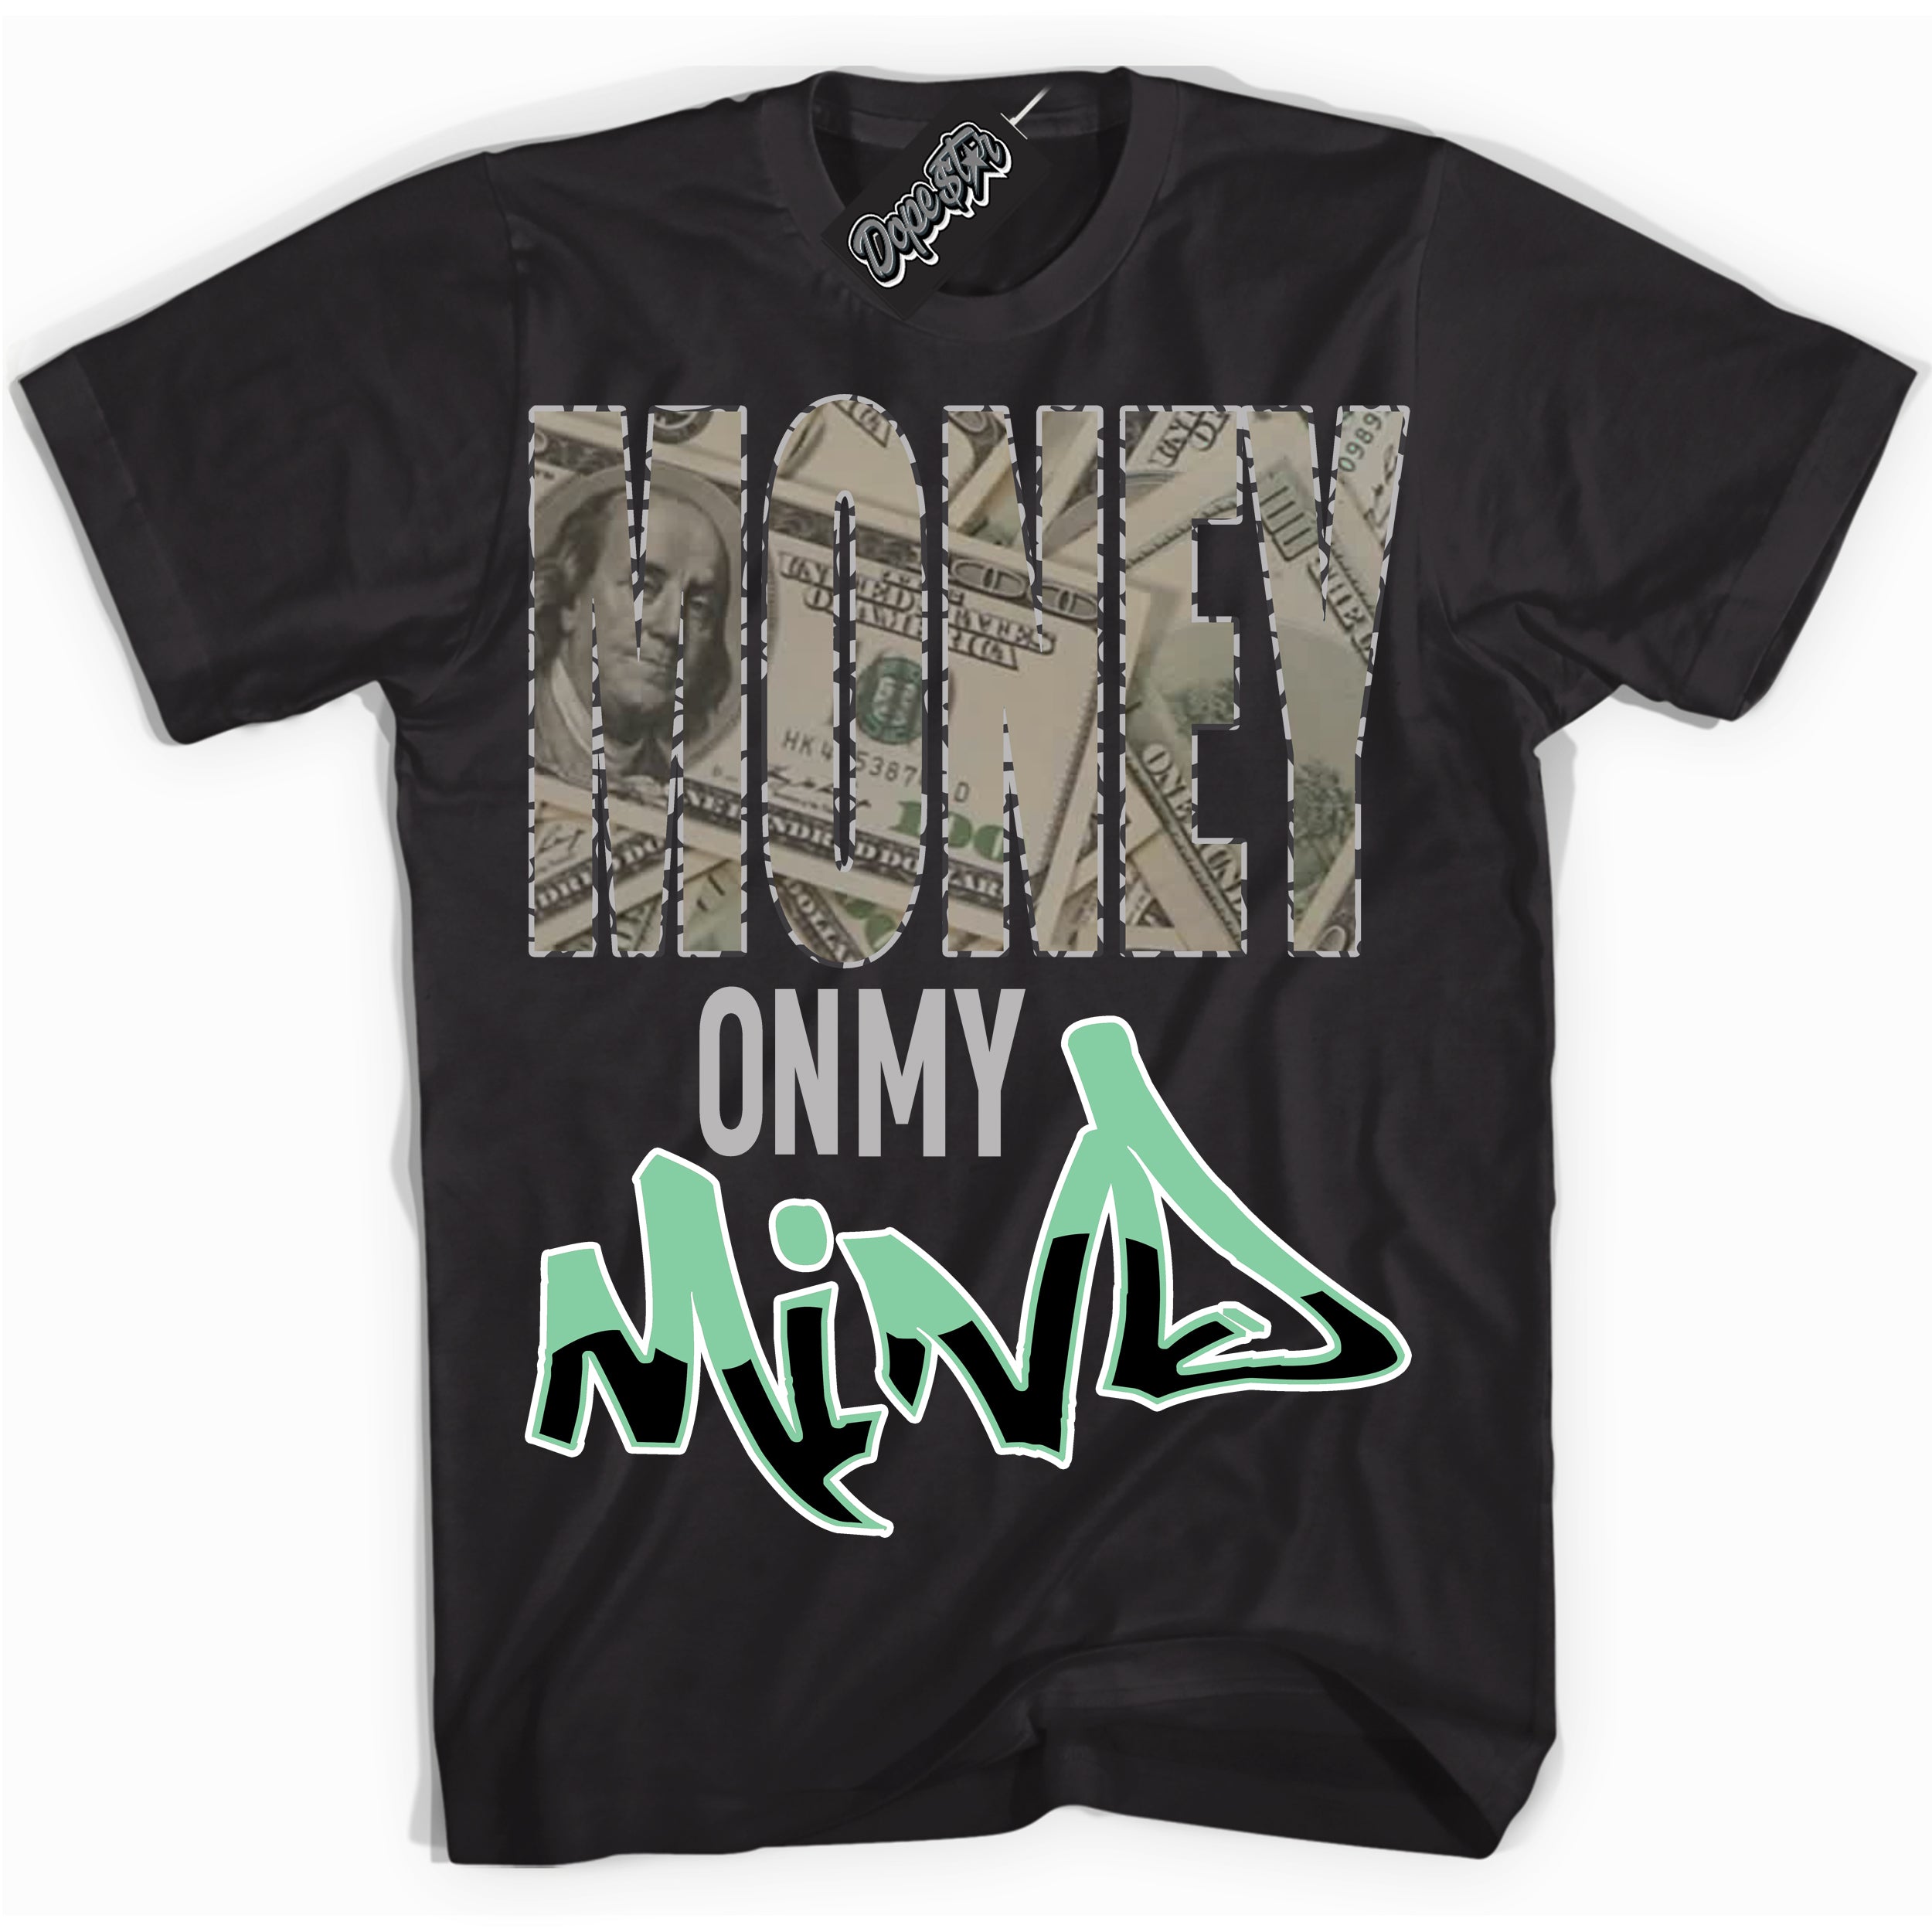 Cool Black graphic tee with “ Money On My Mind ” design, that perfectly matches Green Glow 3s sneakers 